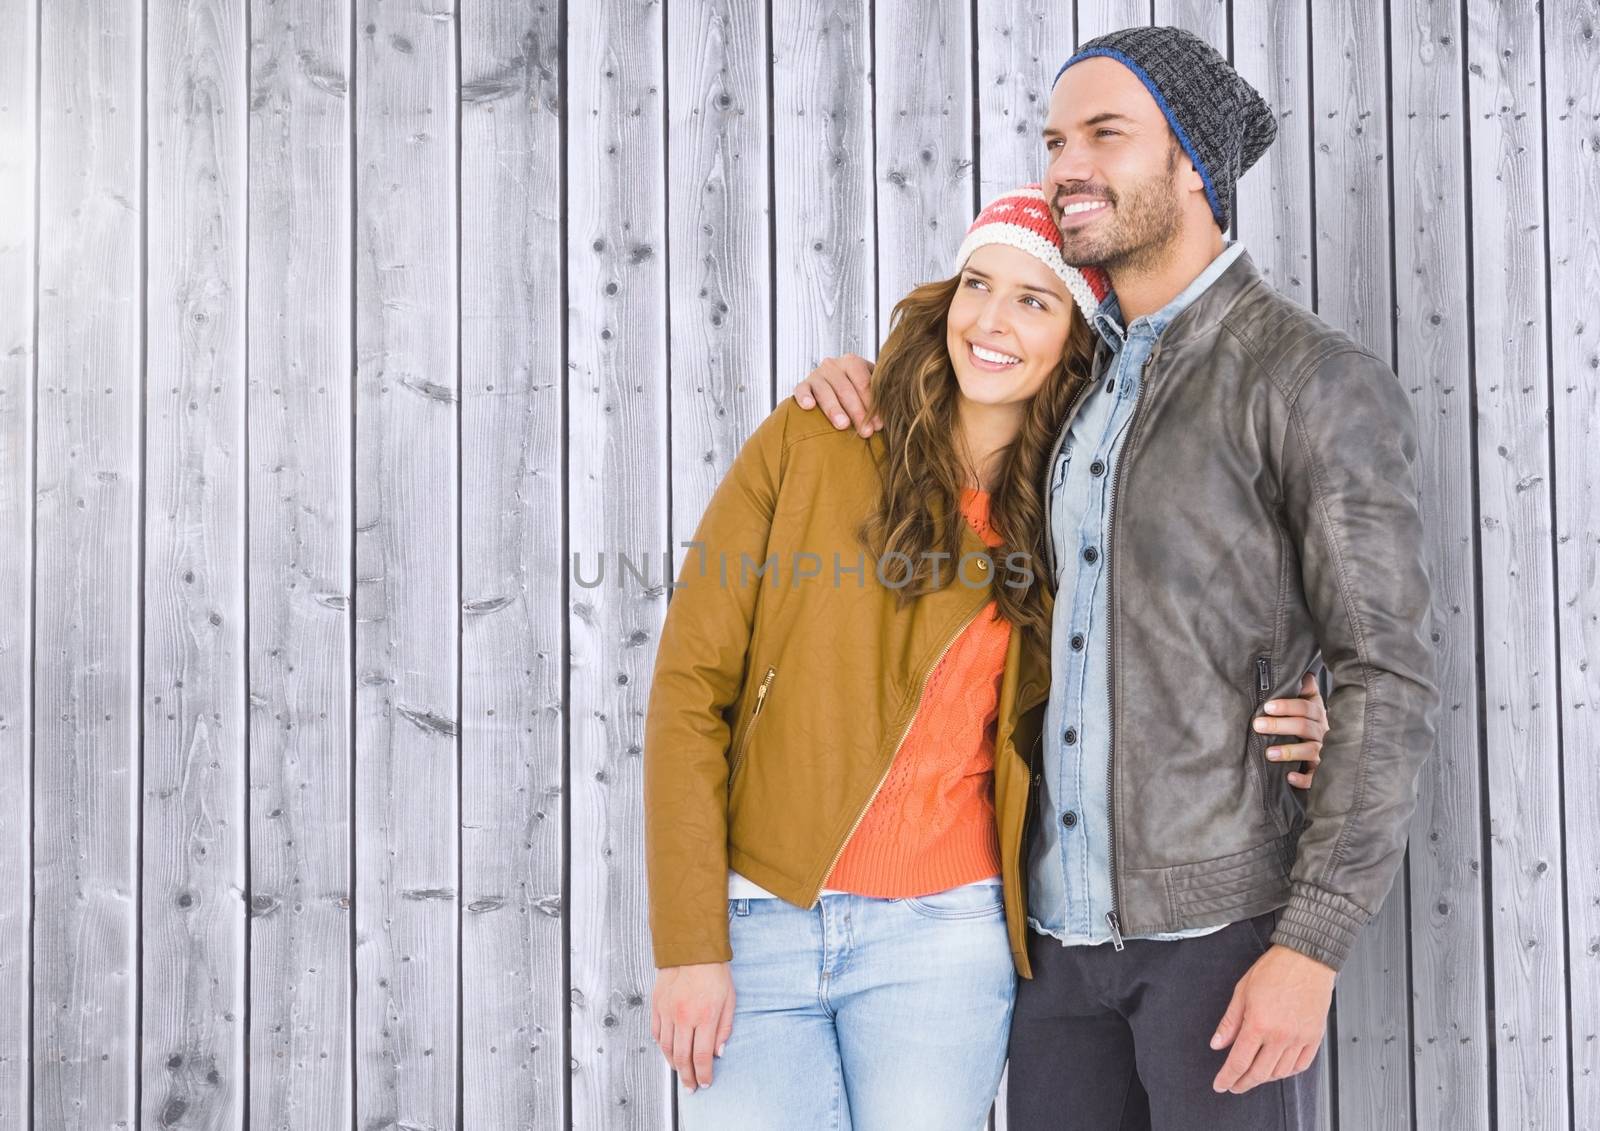 Romantic couple standing against wooden background